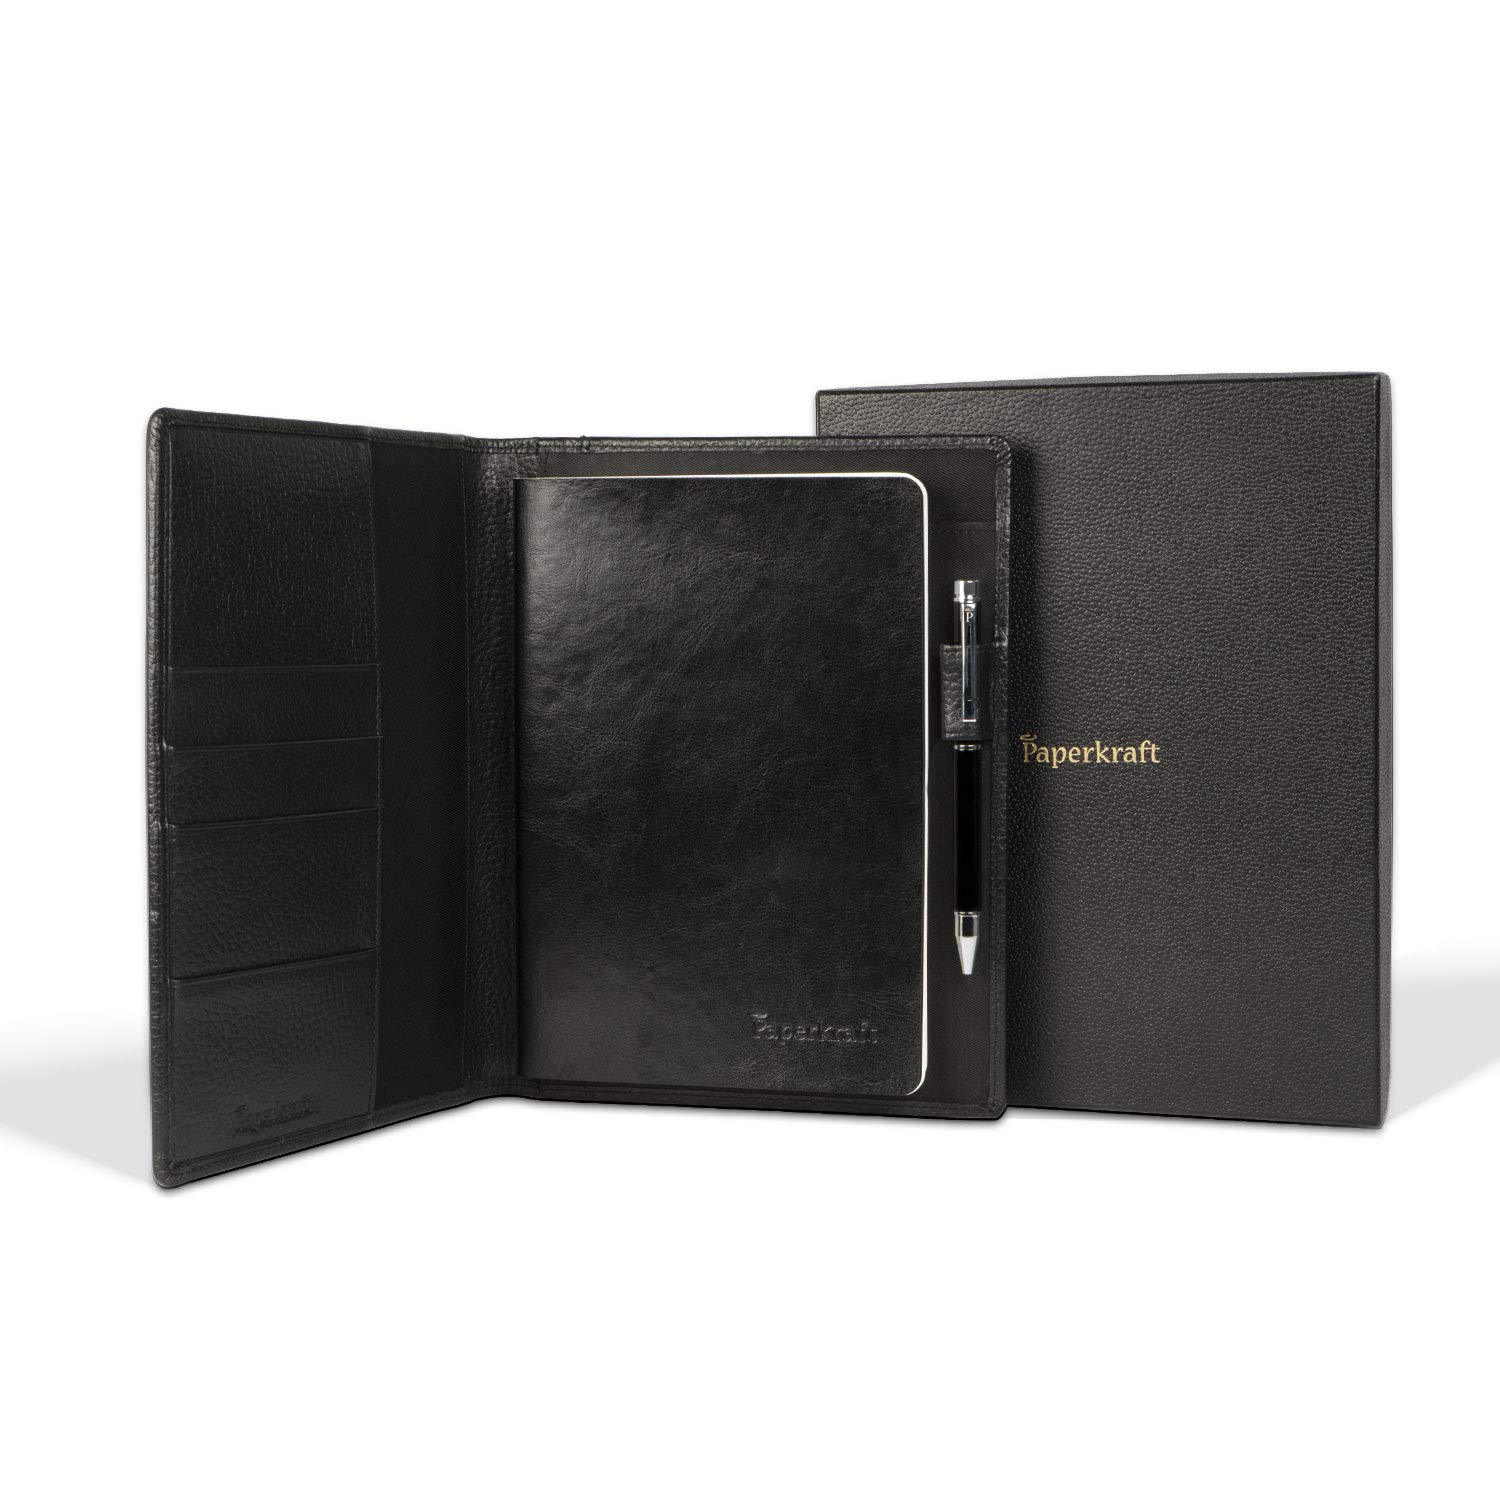 Paperkraft Premium Leather-Sleeved Ruled Notebook Diary (Black) With Pen